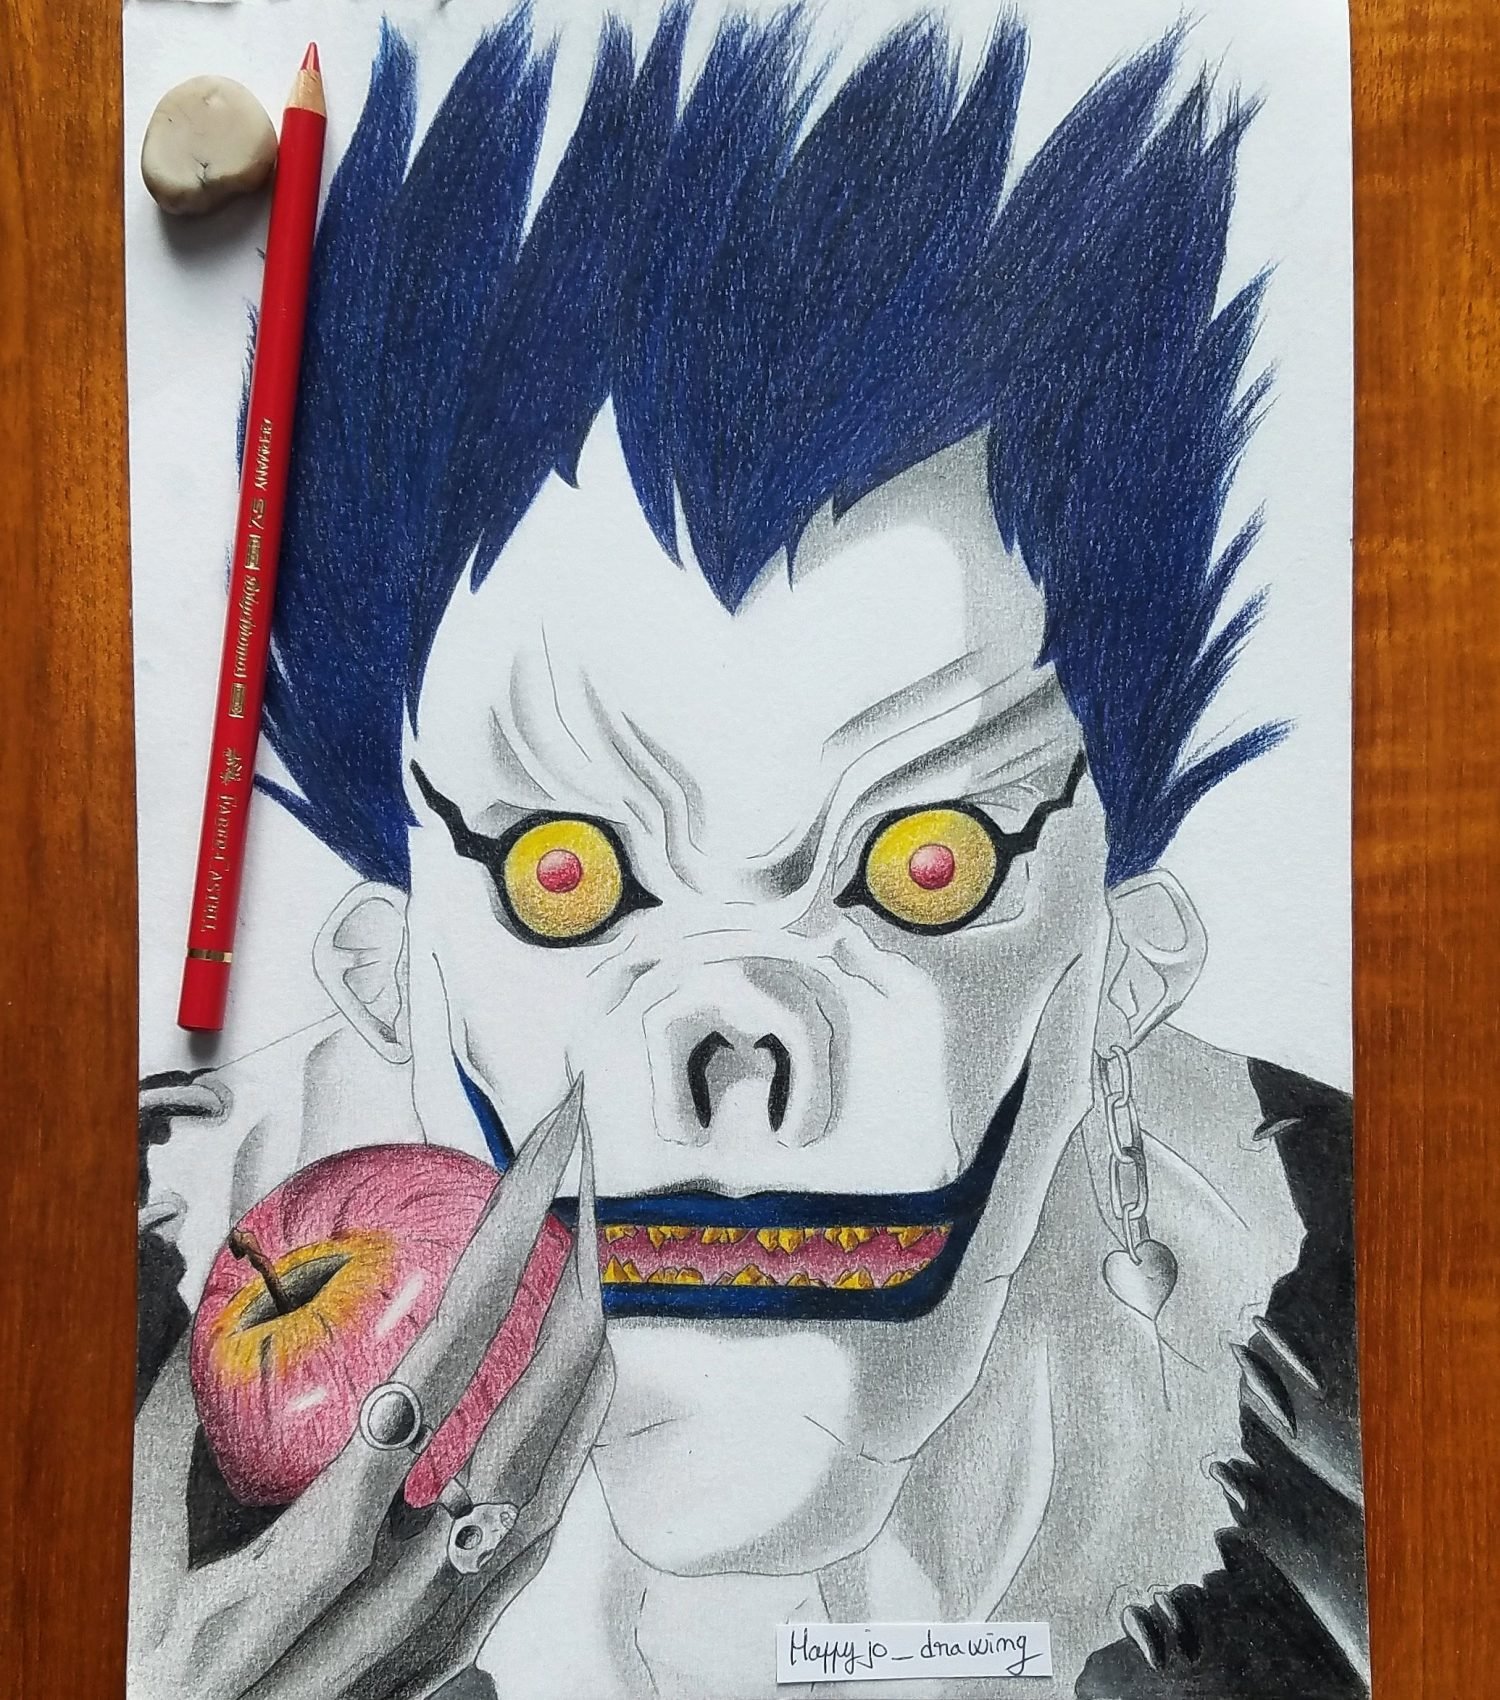 How To Draw RYUK - Death Note - YouTube